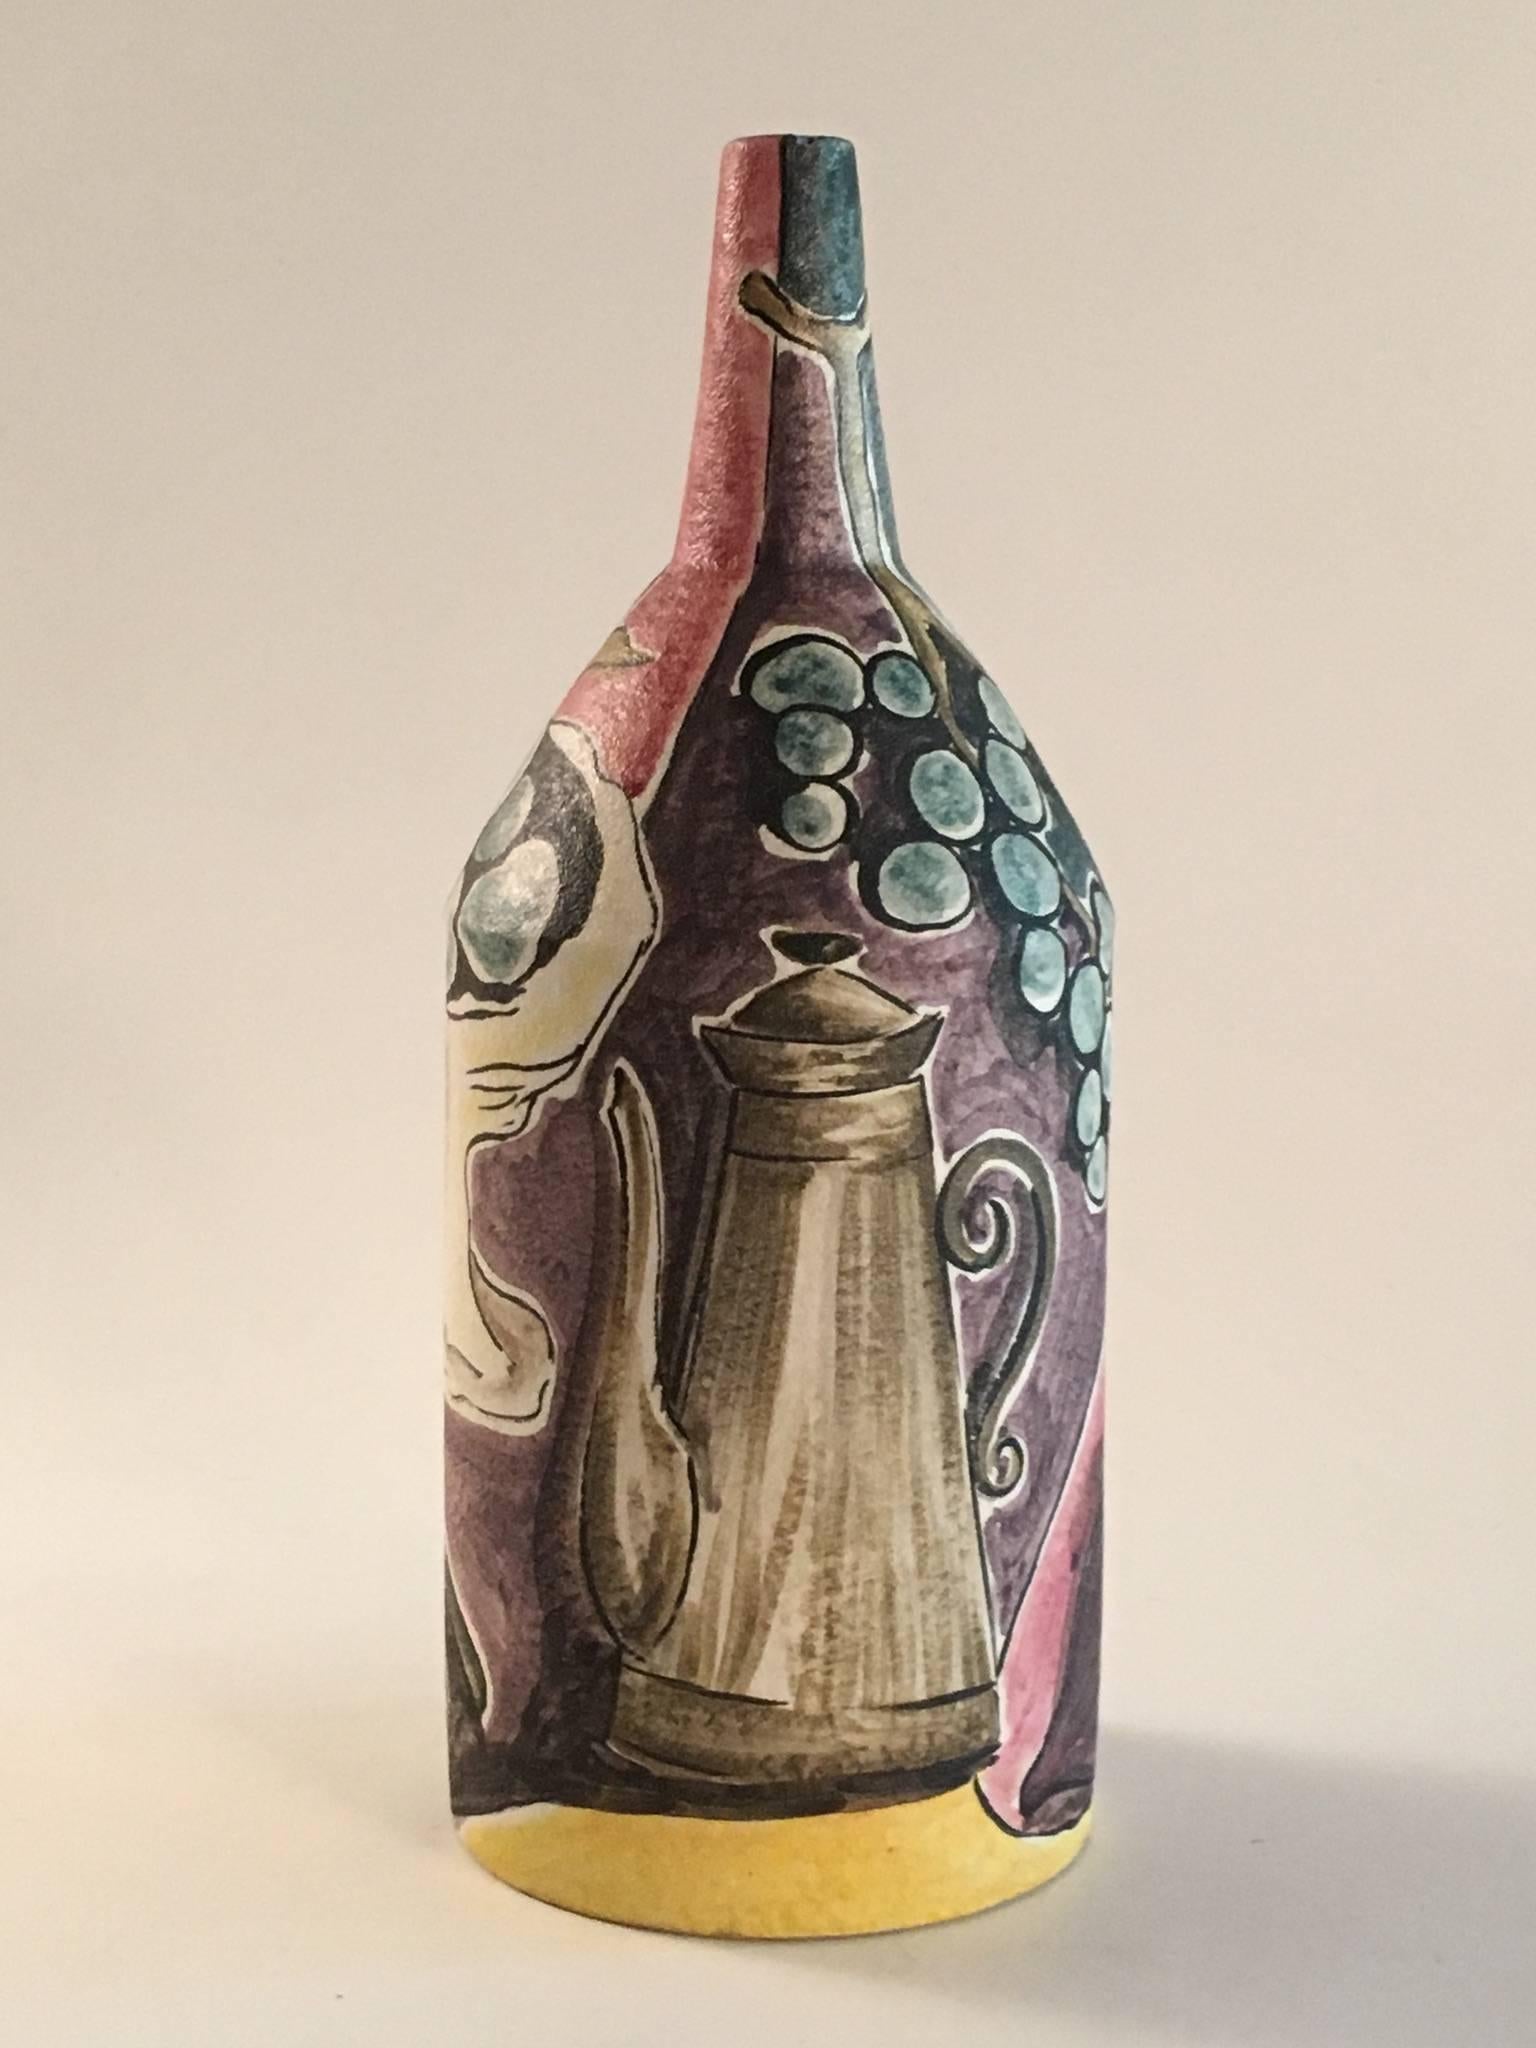 A beautiful and unusual large bottle shaped vase by the Italian master potter Marcello Fantoni. Decorated with a continuous still life table top setting with coffee pot, bowl of grapes, wine bottle and fruit. Finished in a matt glaze the vase and